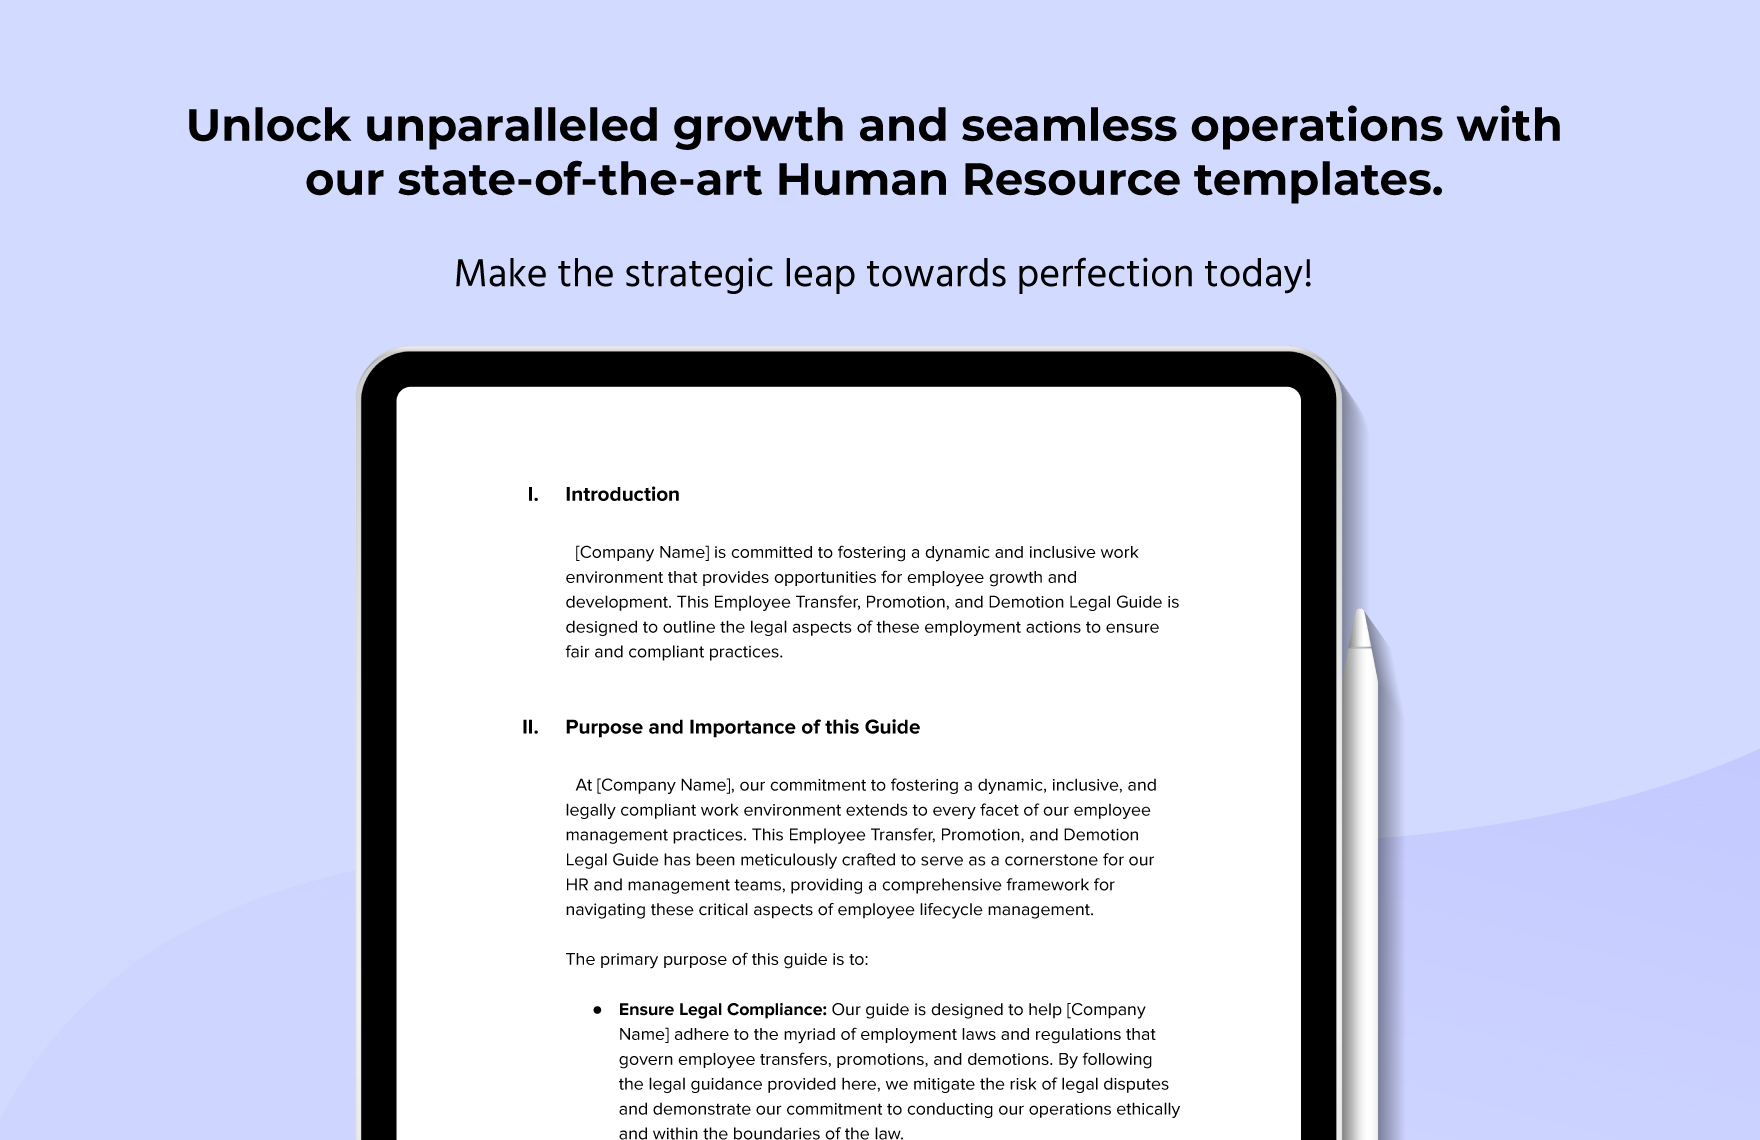 Employee Transfer, Promotion, and Demotion Legal Guide HR Template